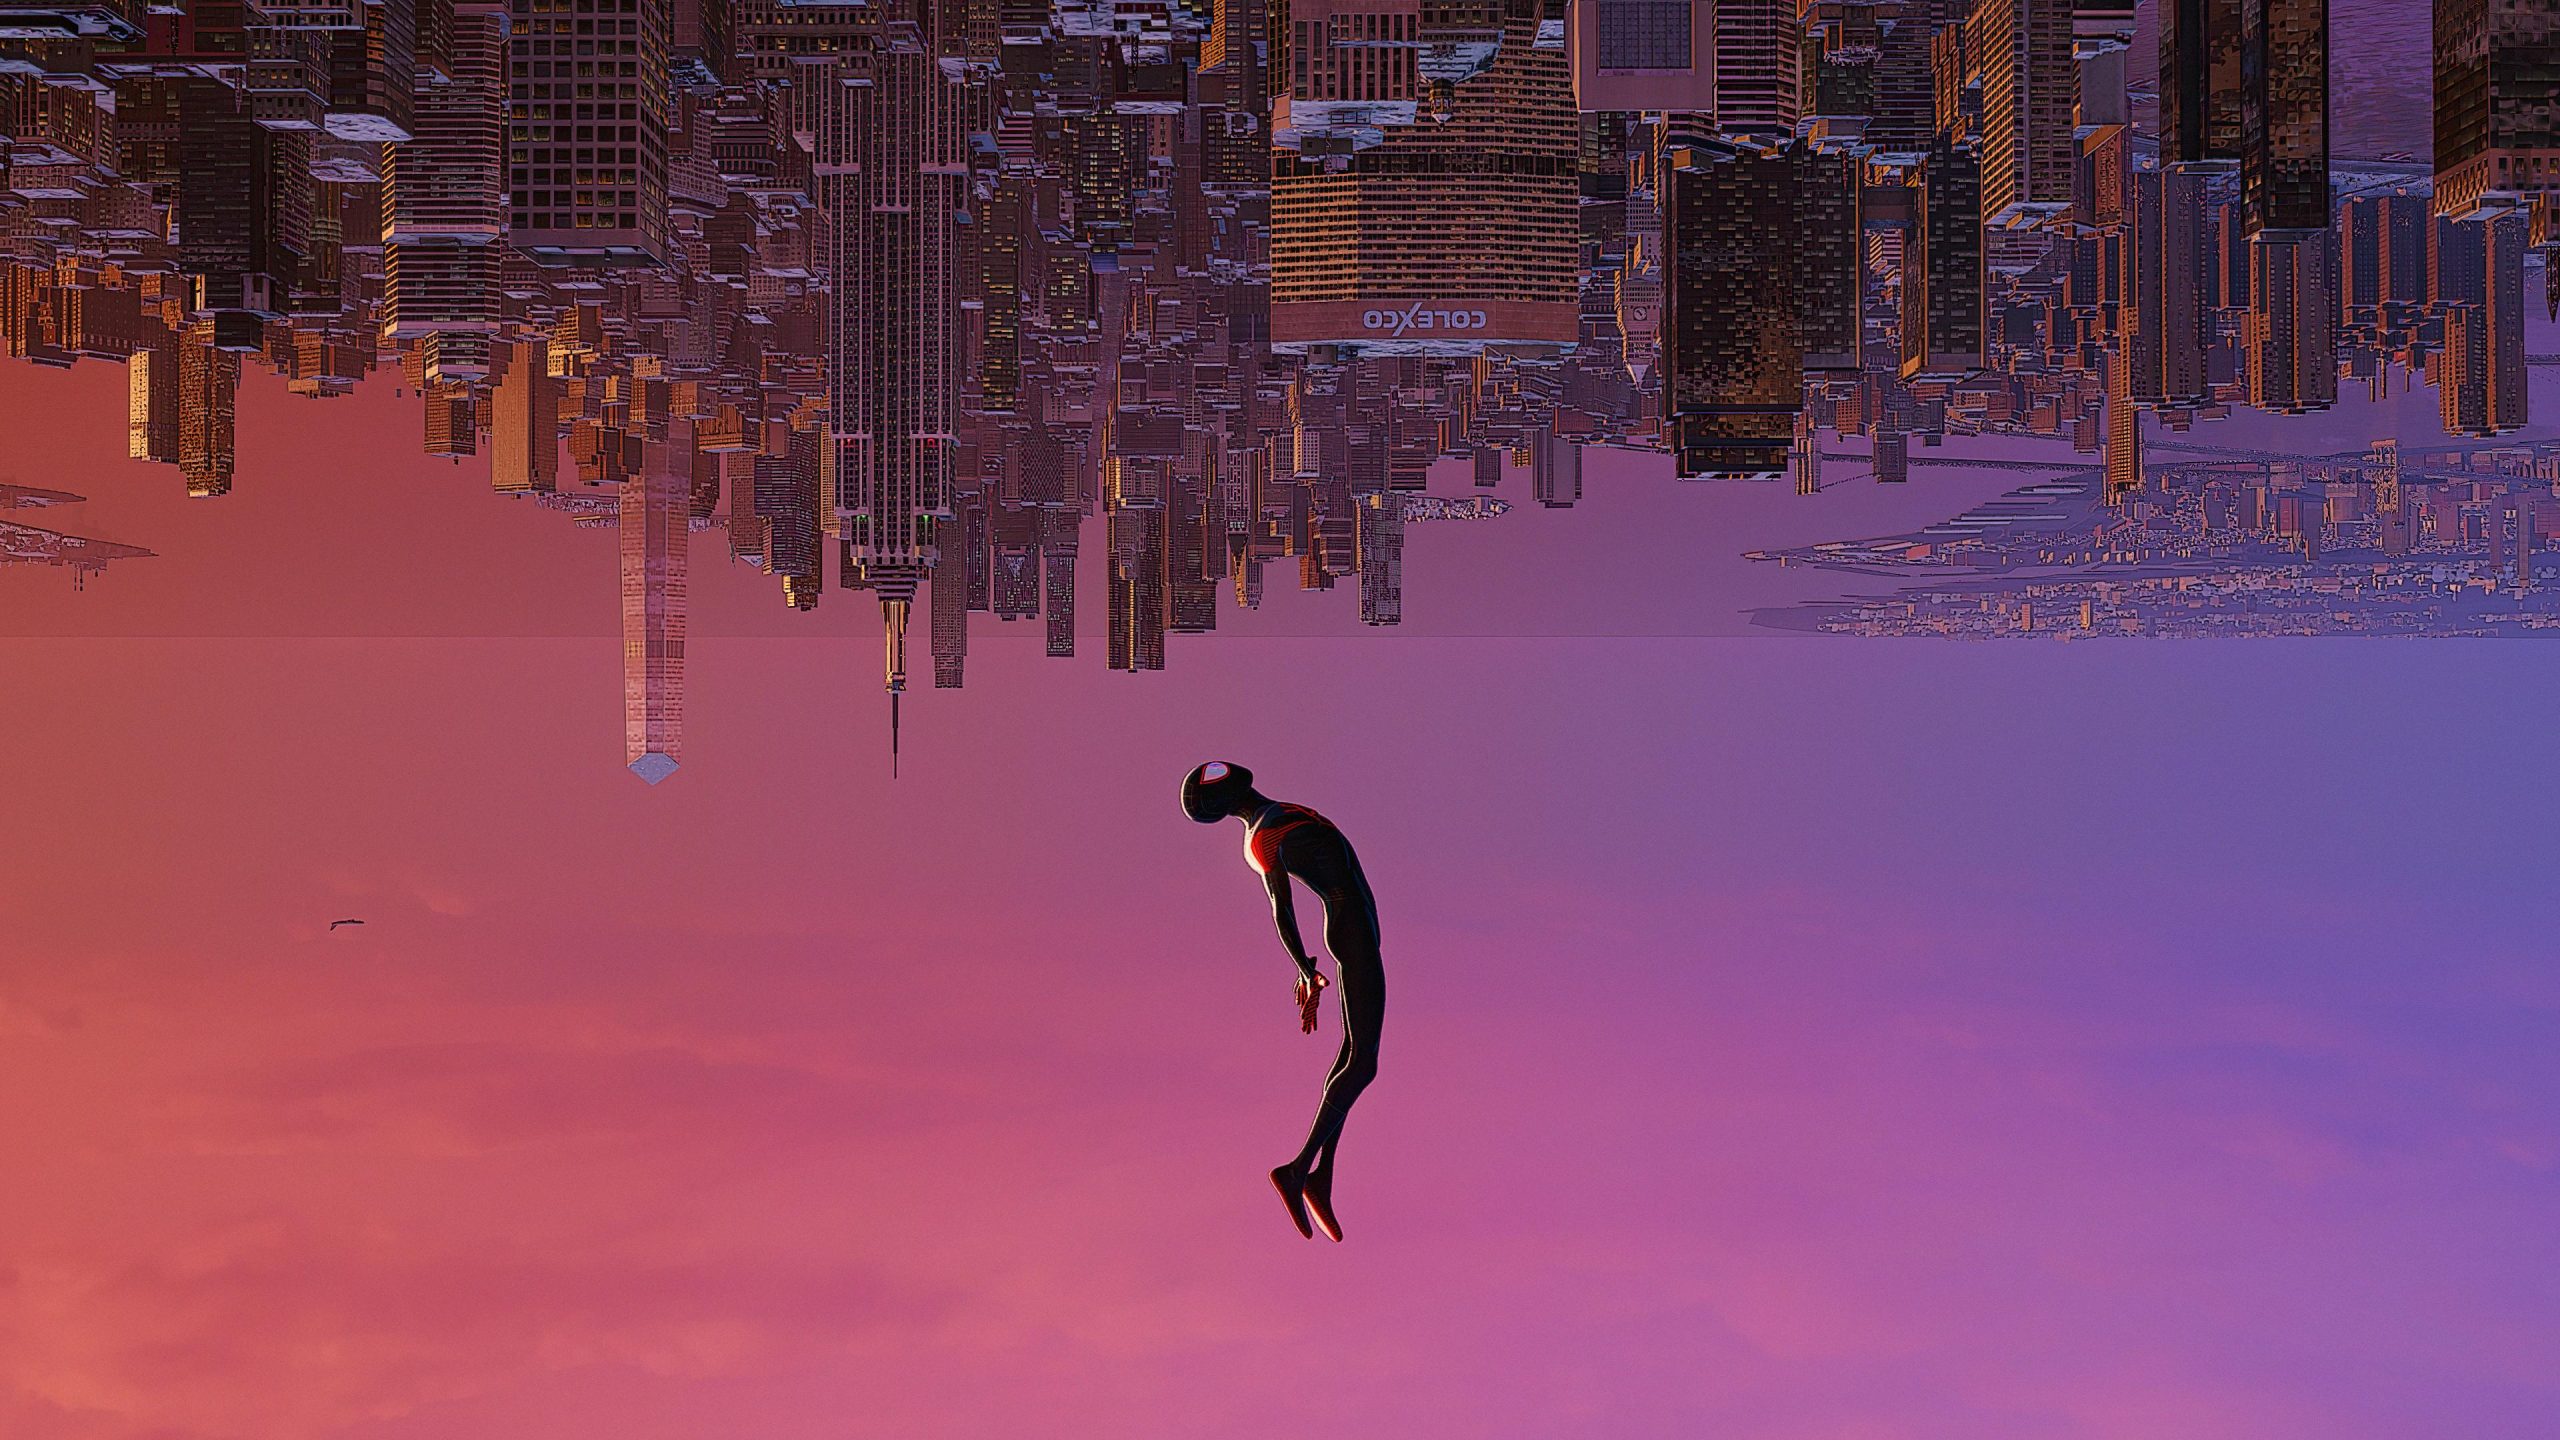 Miles Morales Leap Of Faith Download Wallpaper, Miles Morales Leap Of Faith, Movies